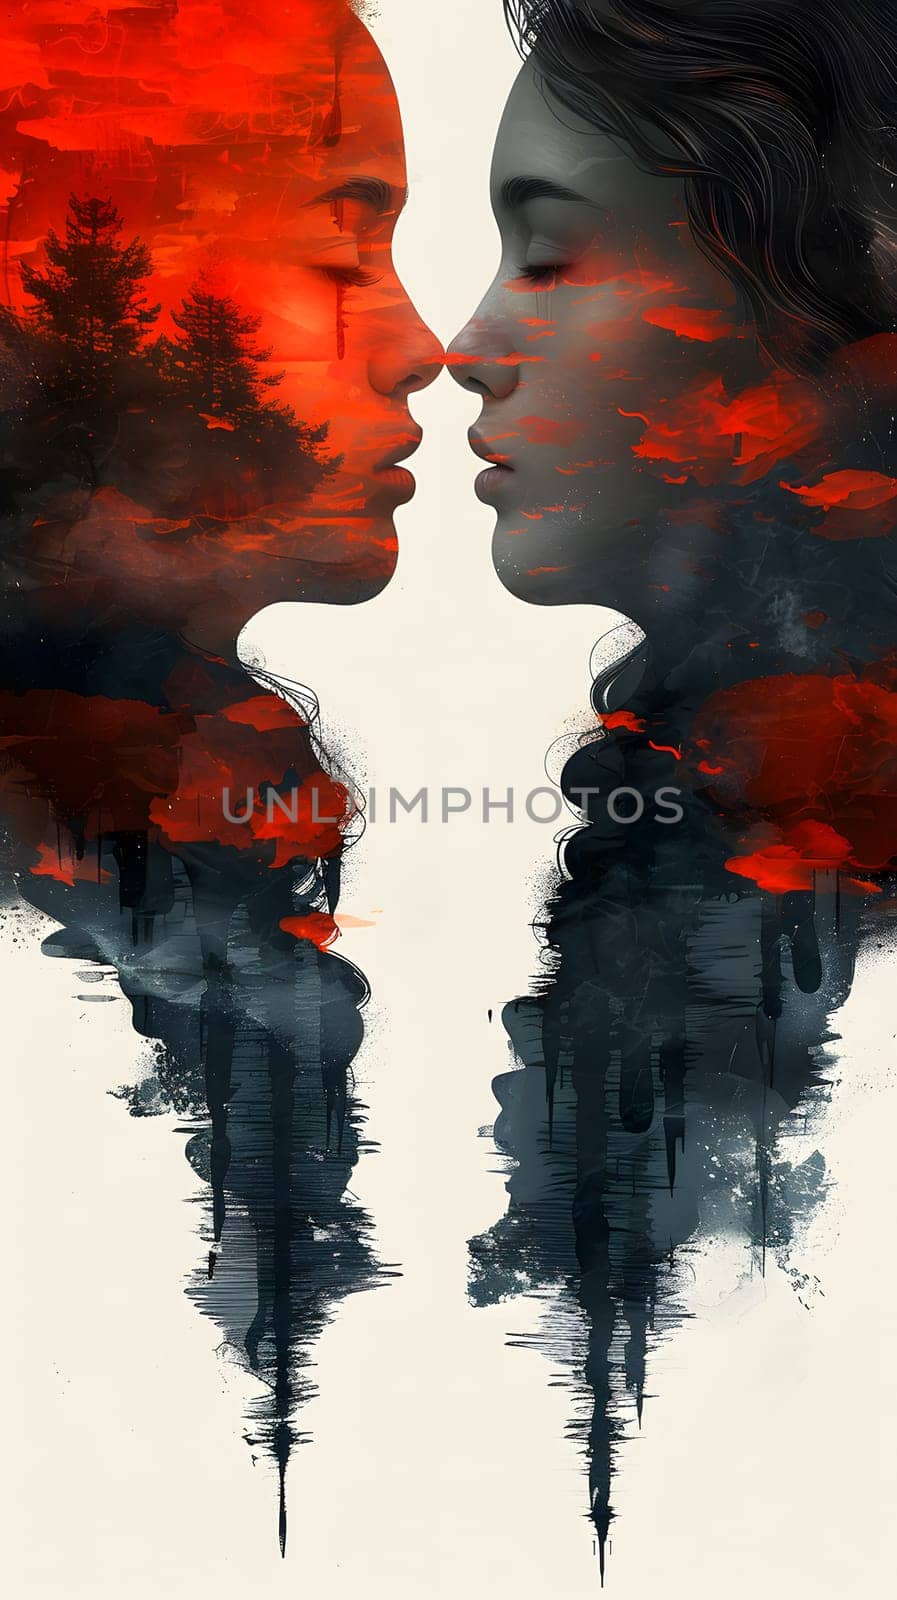 A jawdropping double exposure art piece capturing two people kissing with trees in the background, showcasing symmetry and happy gestures